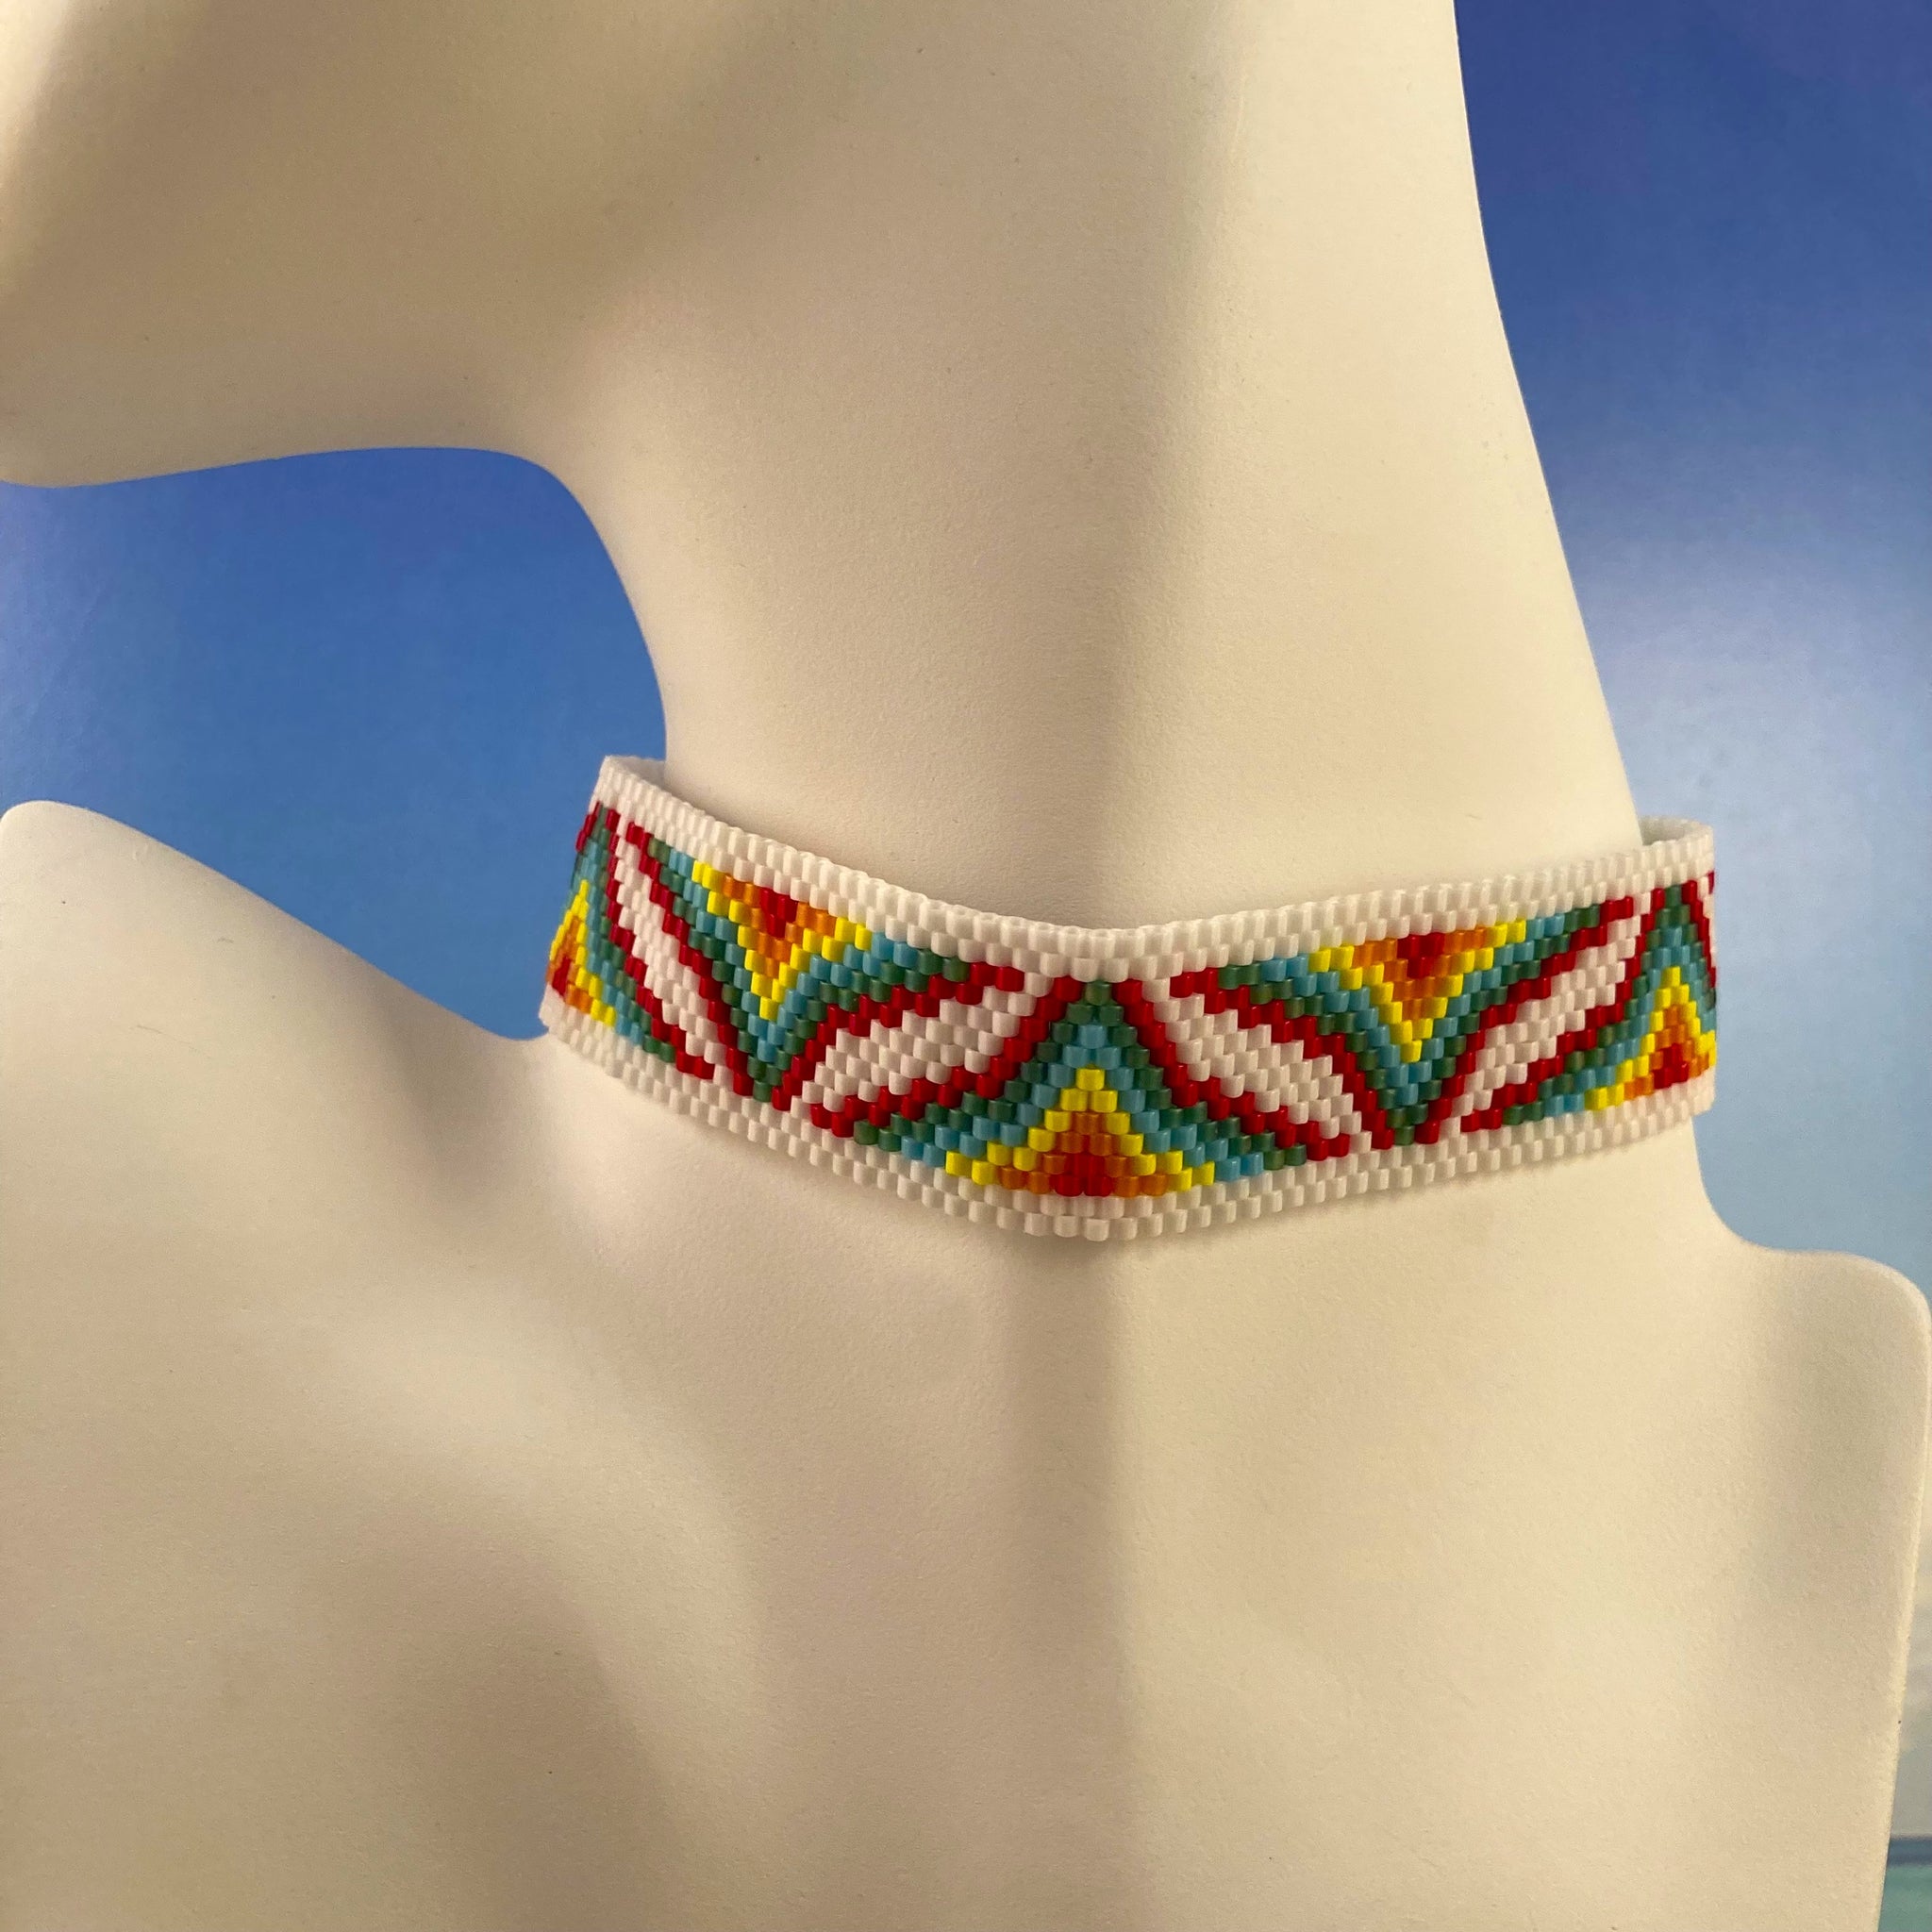 Beaded Choker Bright REd GReen Blue yellow peaks Ribbon Tie adjustable choker necklace hippie boho couture Vogue street wear Beaded By The Beach